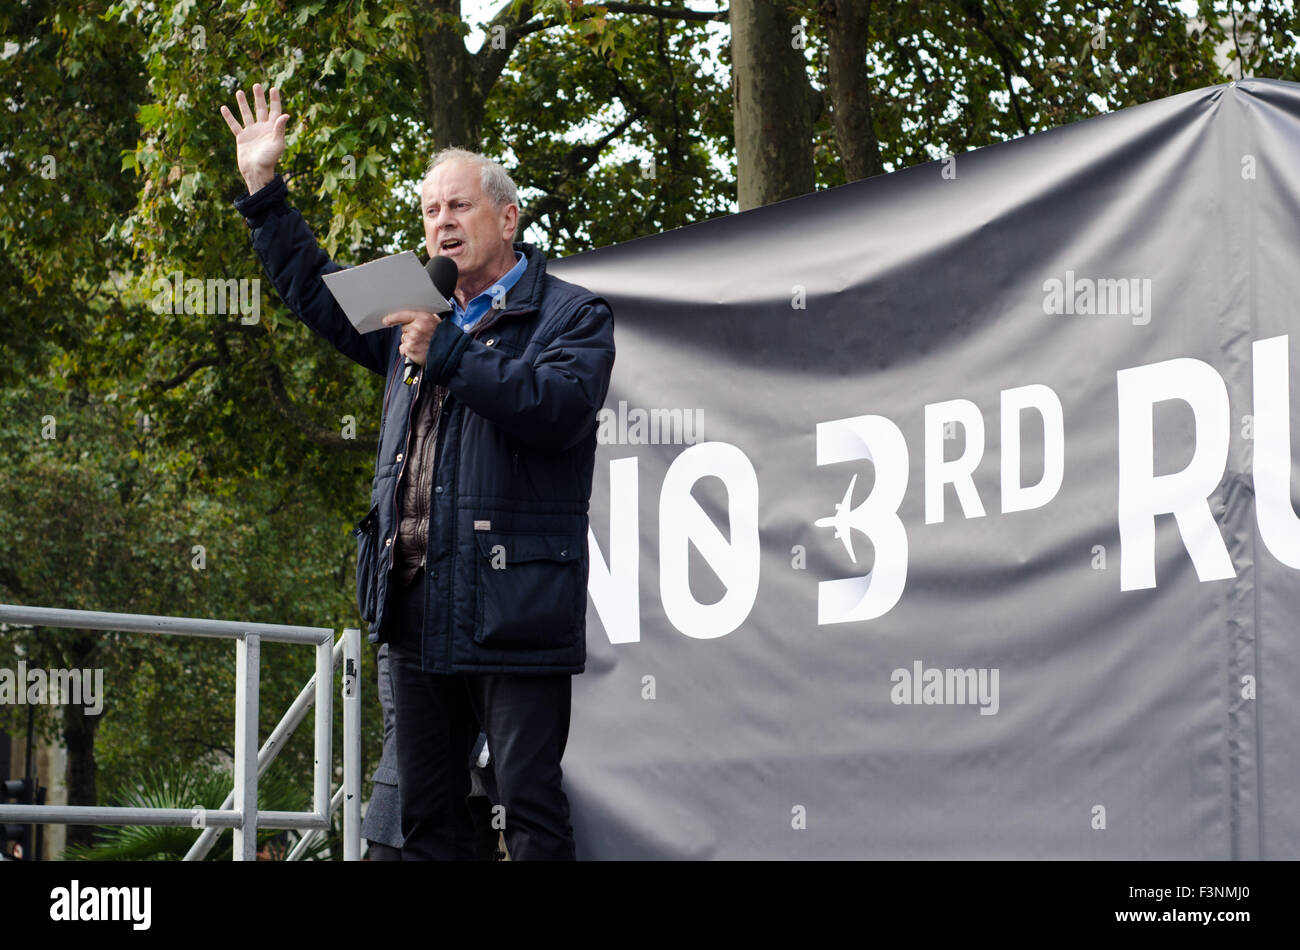 London, UK. 10th Oct, 2015. Gyles Brandreth addresses the crowd in Parliament Square, London, rallying against the proposal of a thirds runway at Heathrow Airport. Credit:  Bertie Oakes/Alamy Live News Stock Photo